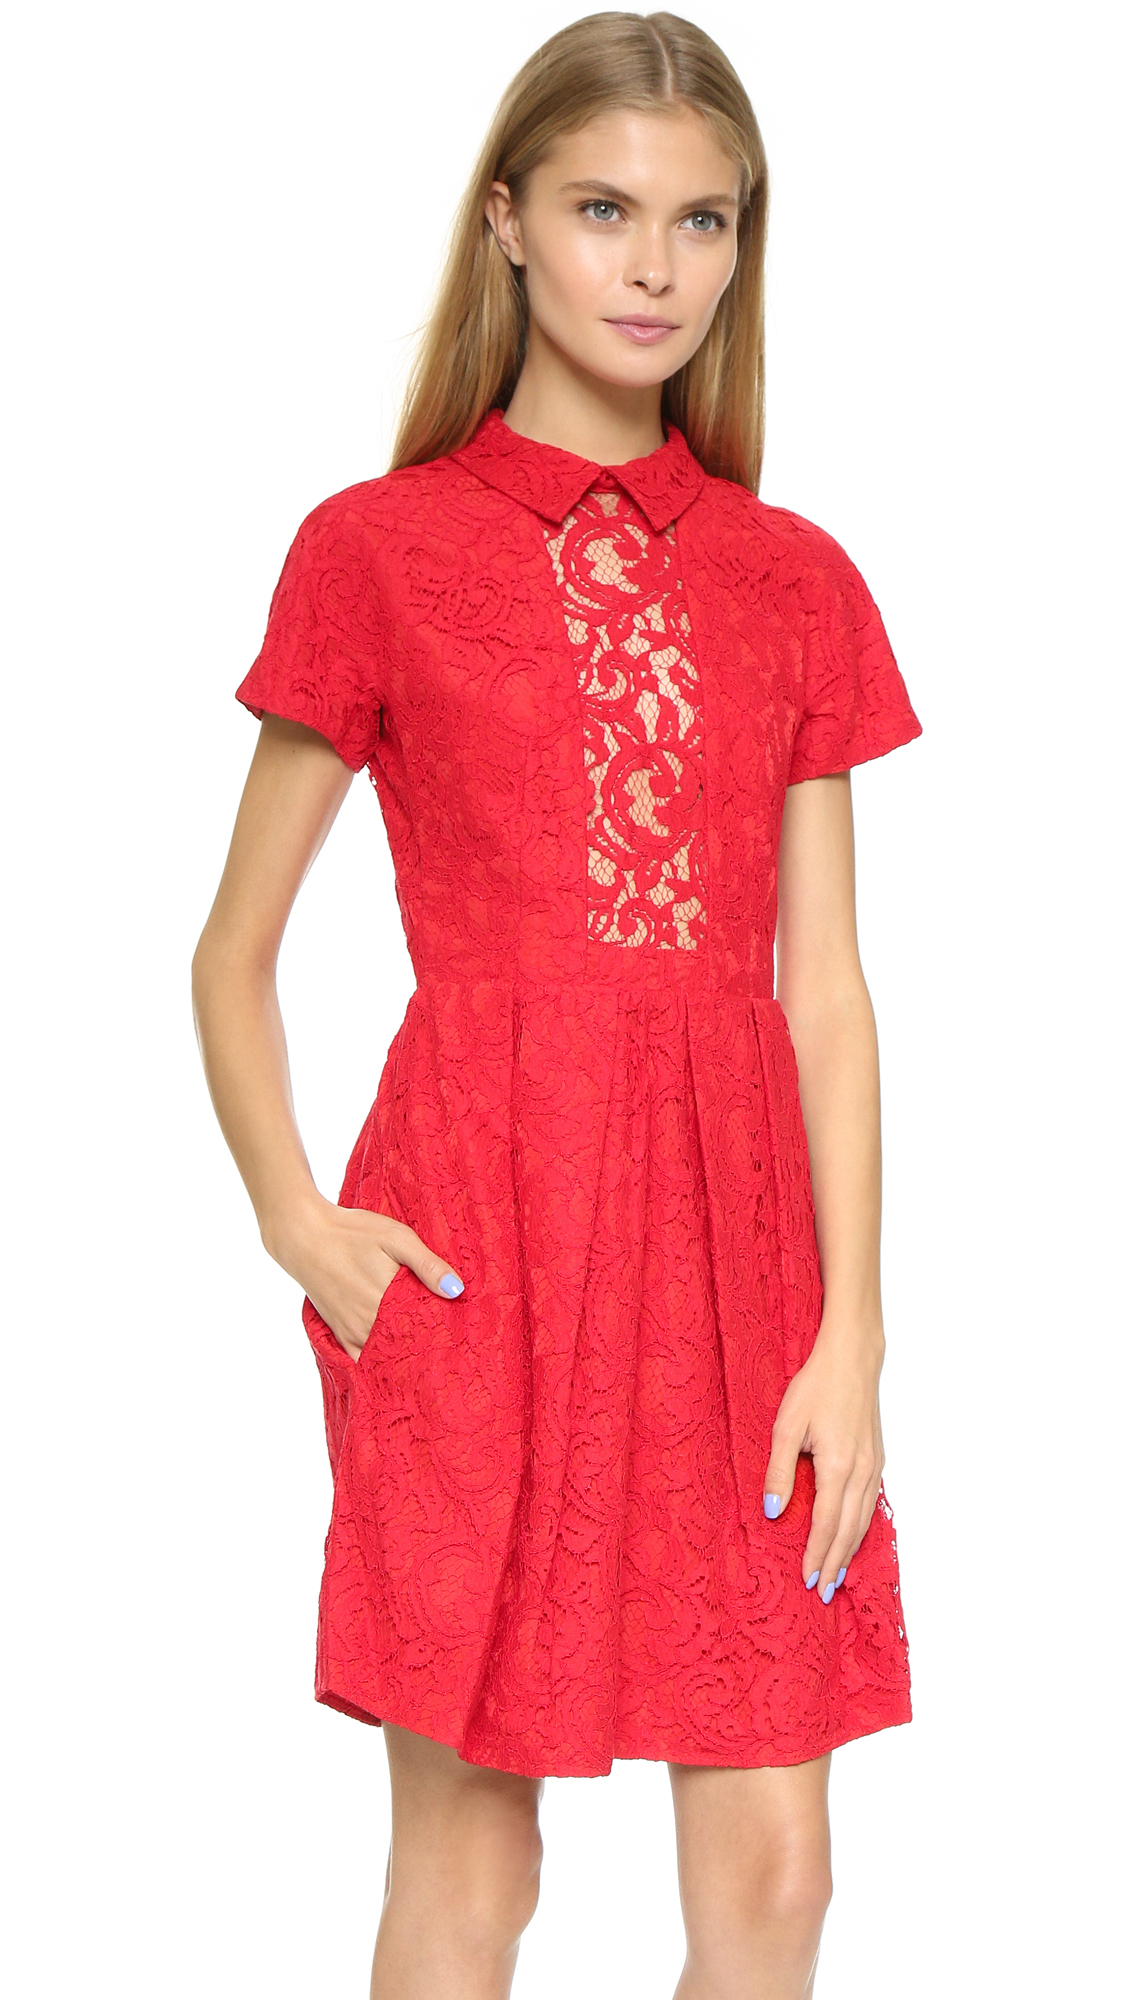 Lyst - Carven Lace Dress - Rouge in Red